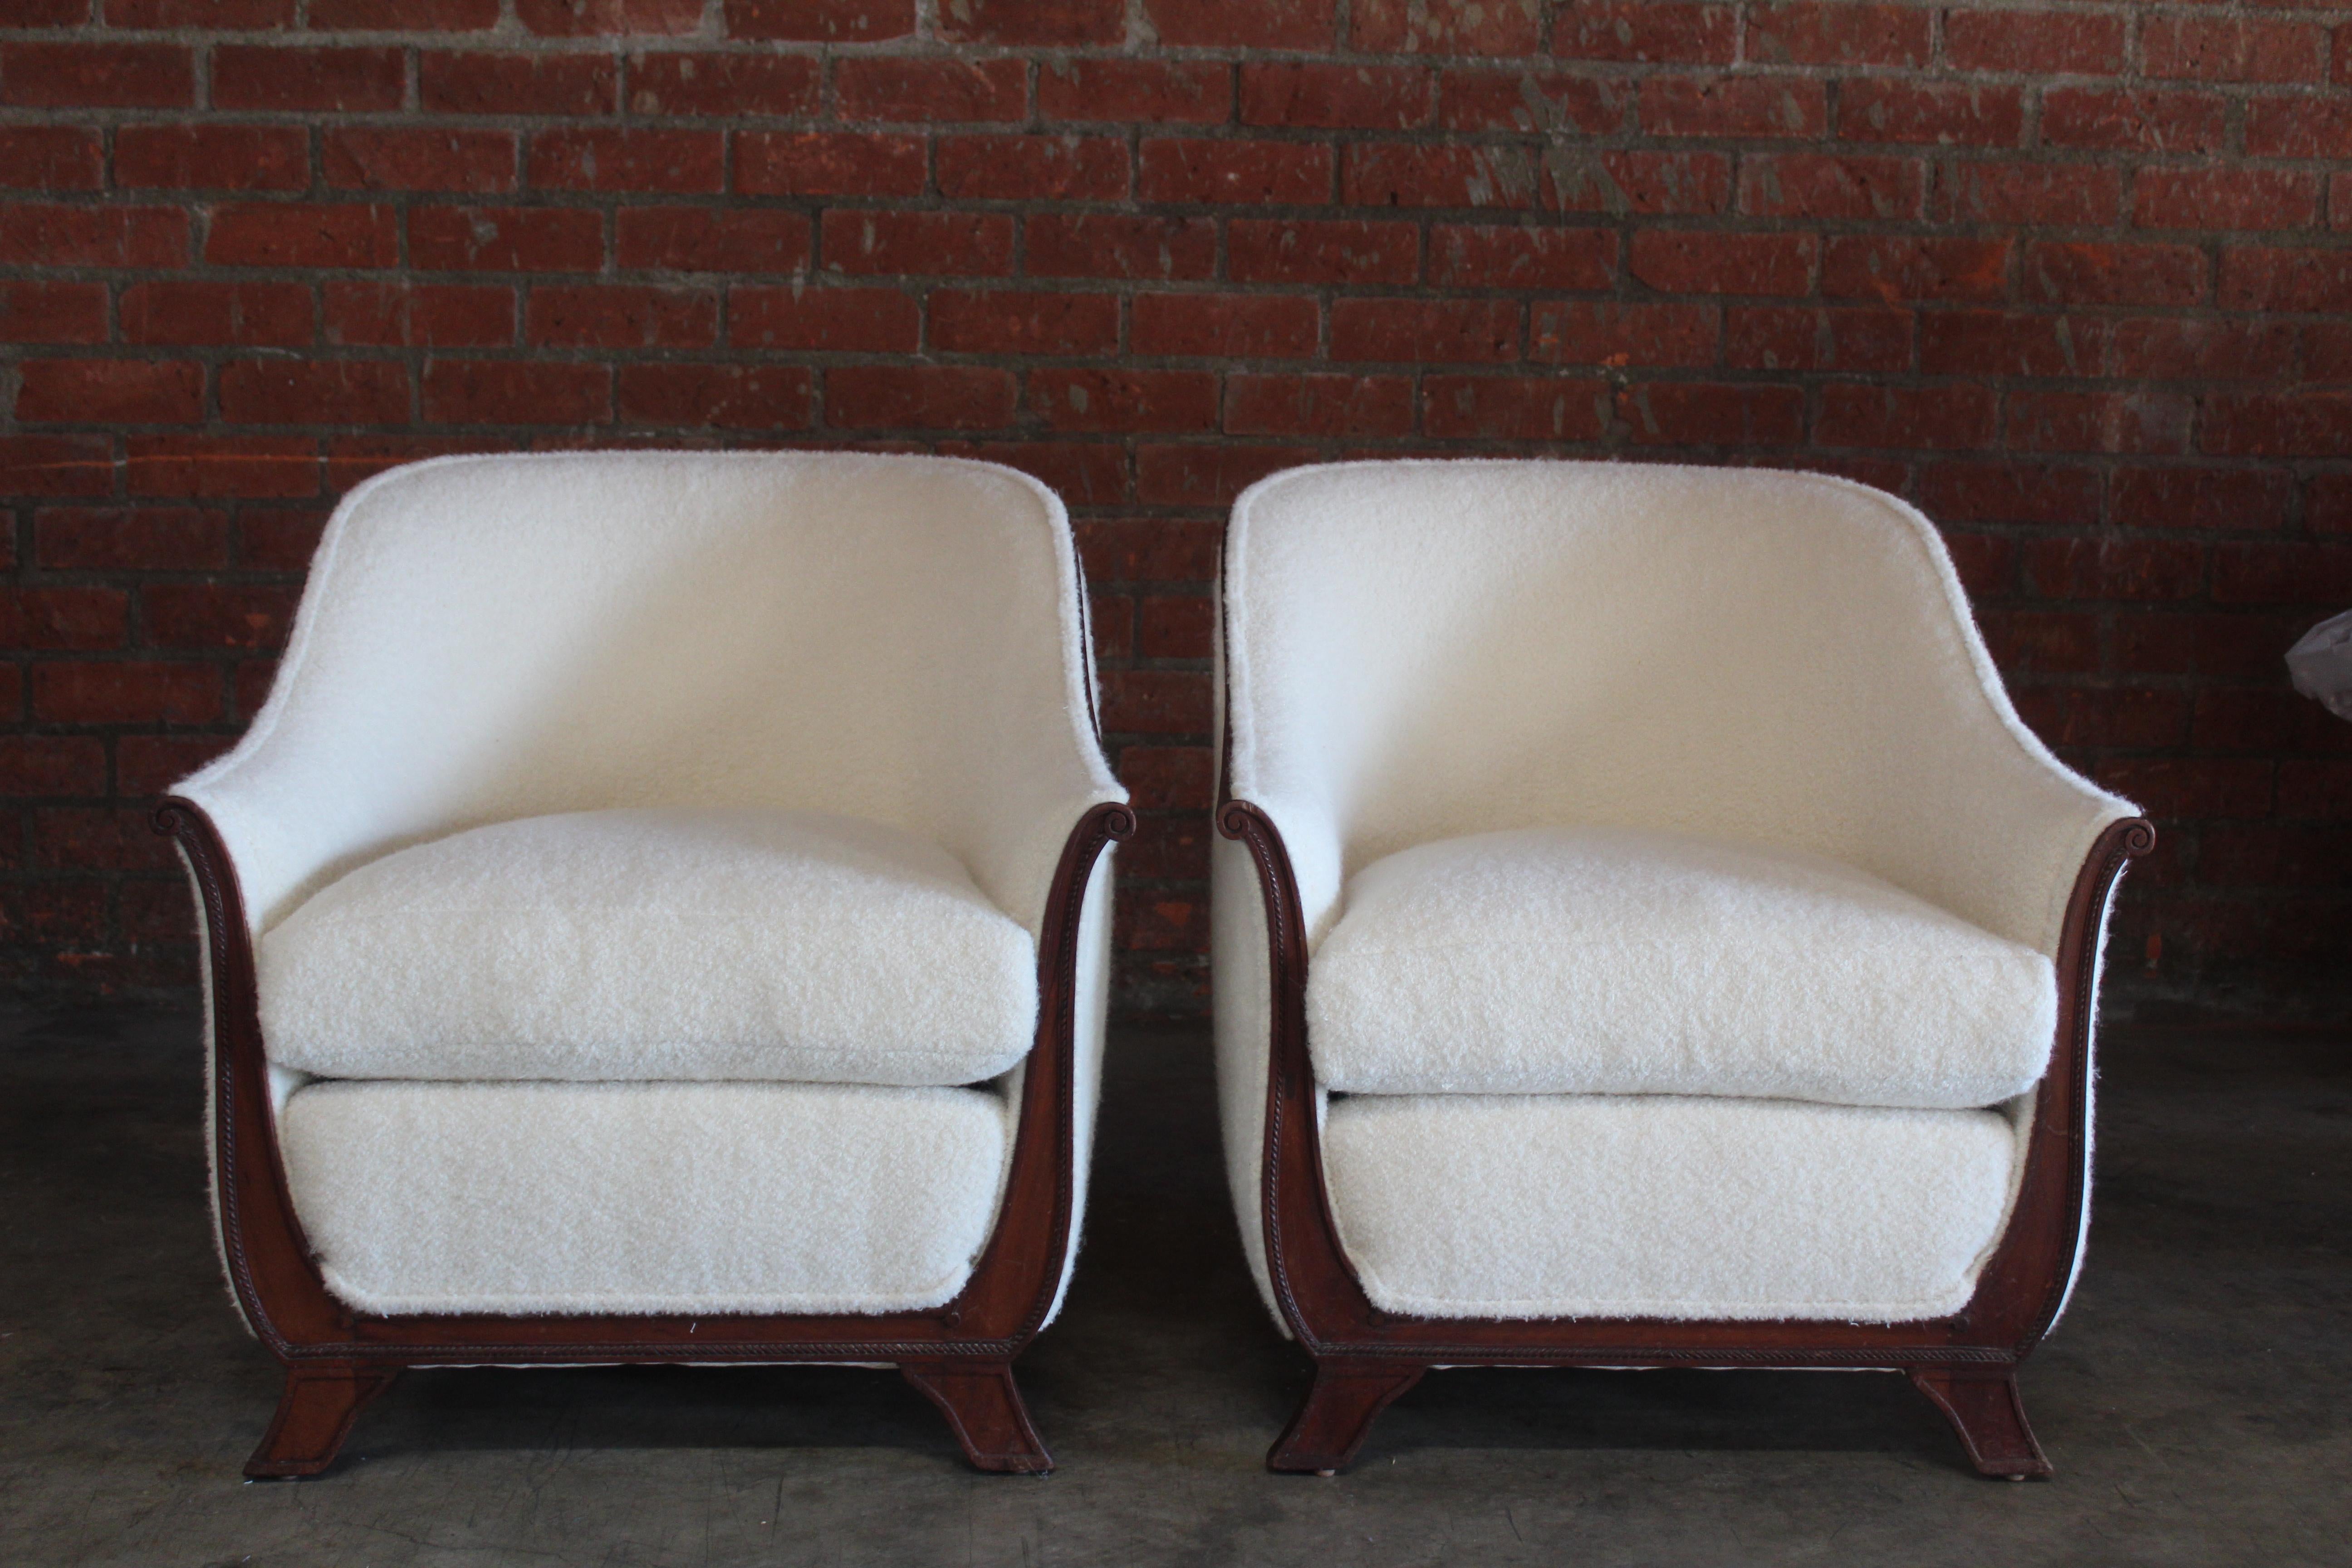 Art Deco Pair of Lounge Chairs in Alpaca Wool, France, 1930s. Attributed to Jules Leleu